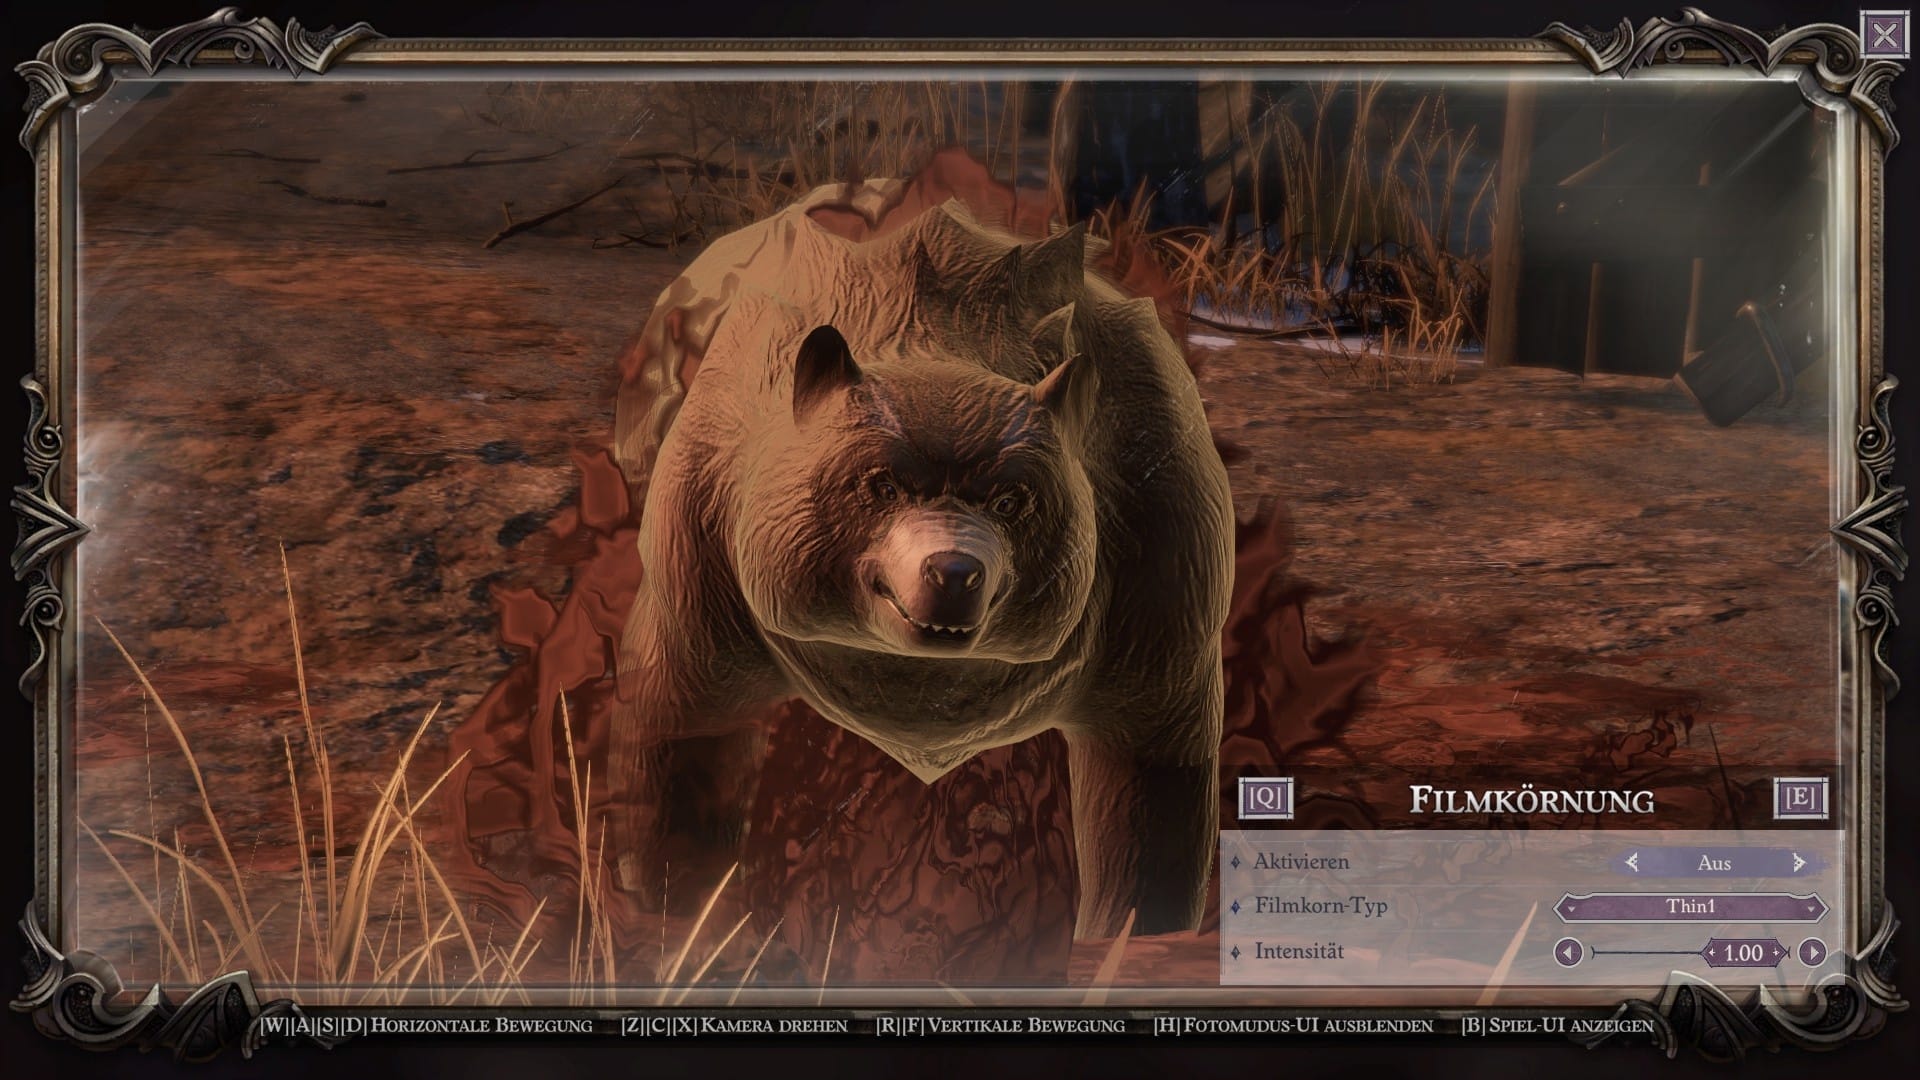 (Even the fat bear wants you to finally play Pathfinder.)